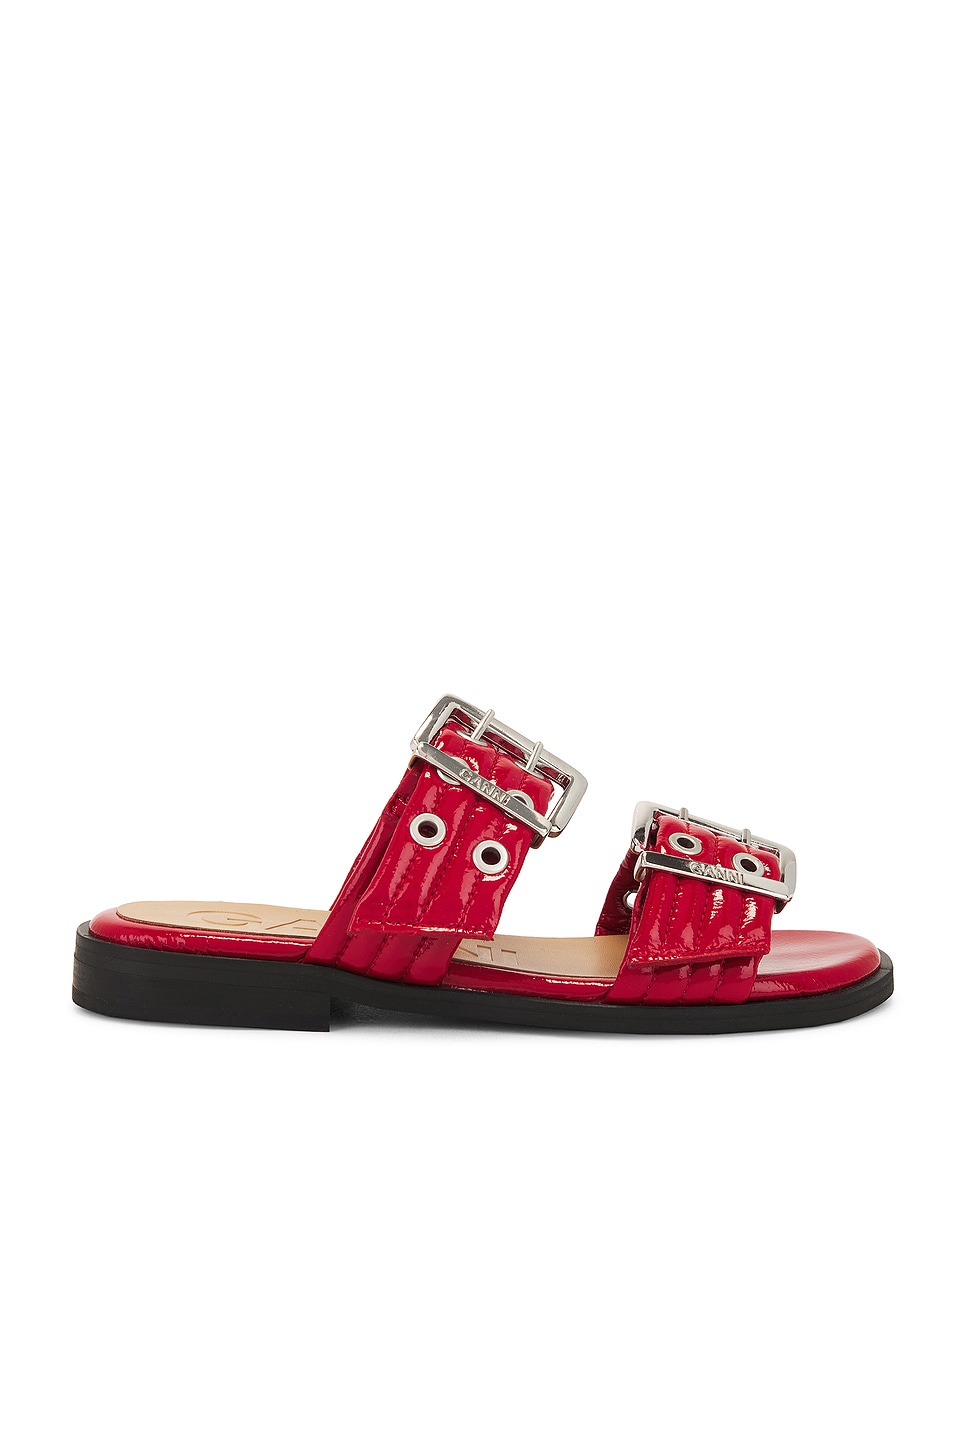 Image 1 of Ganni Two Strap Sandal in Racing Red